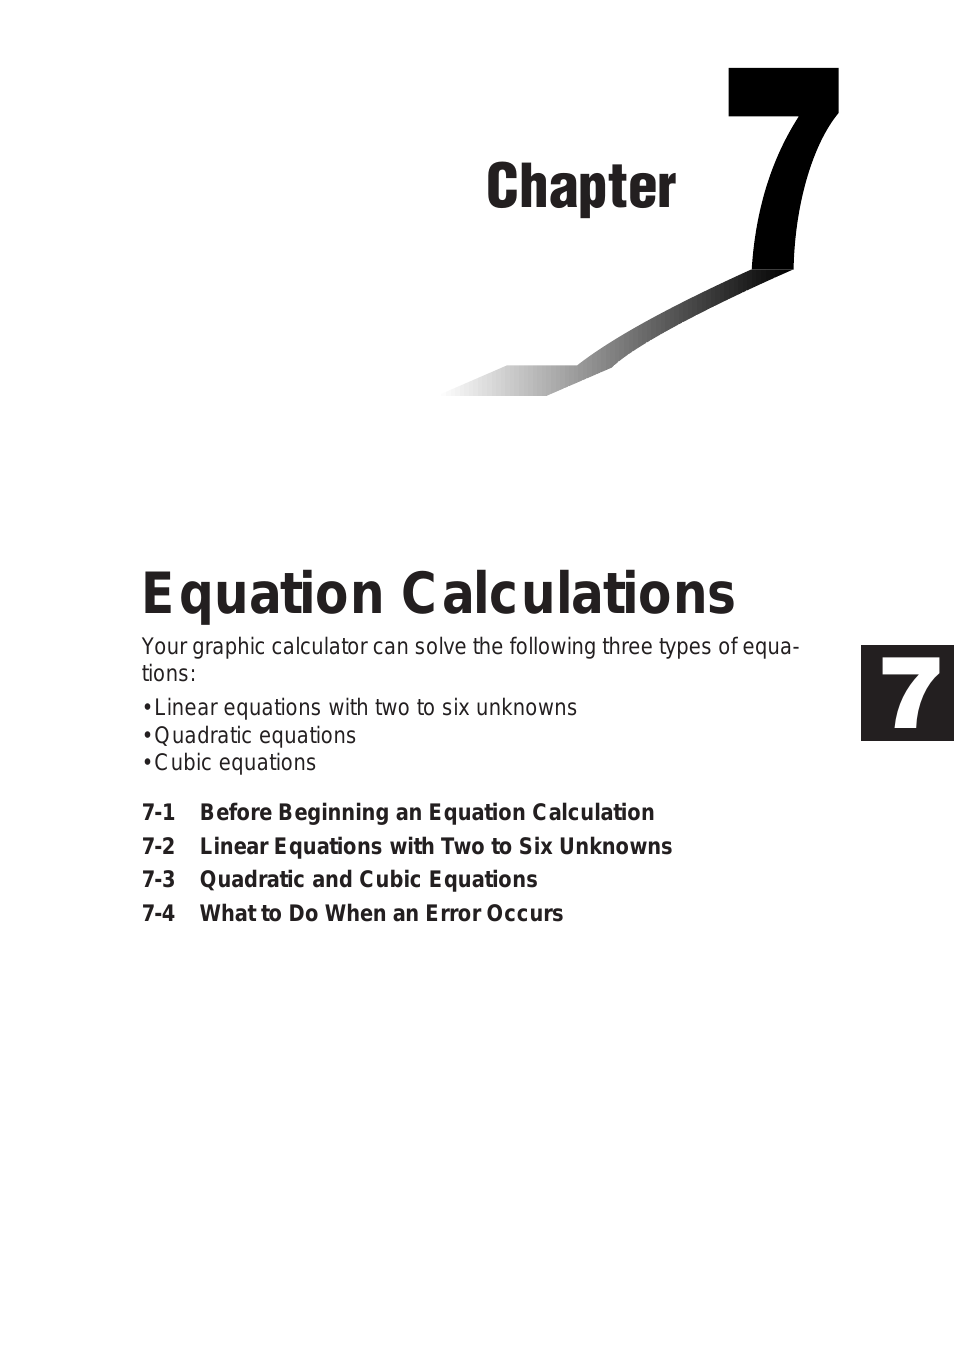 fx-9750G Equation Calculations (Page 1)